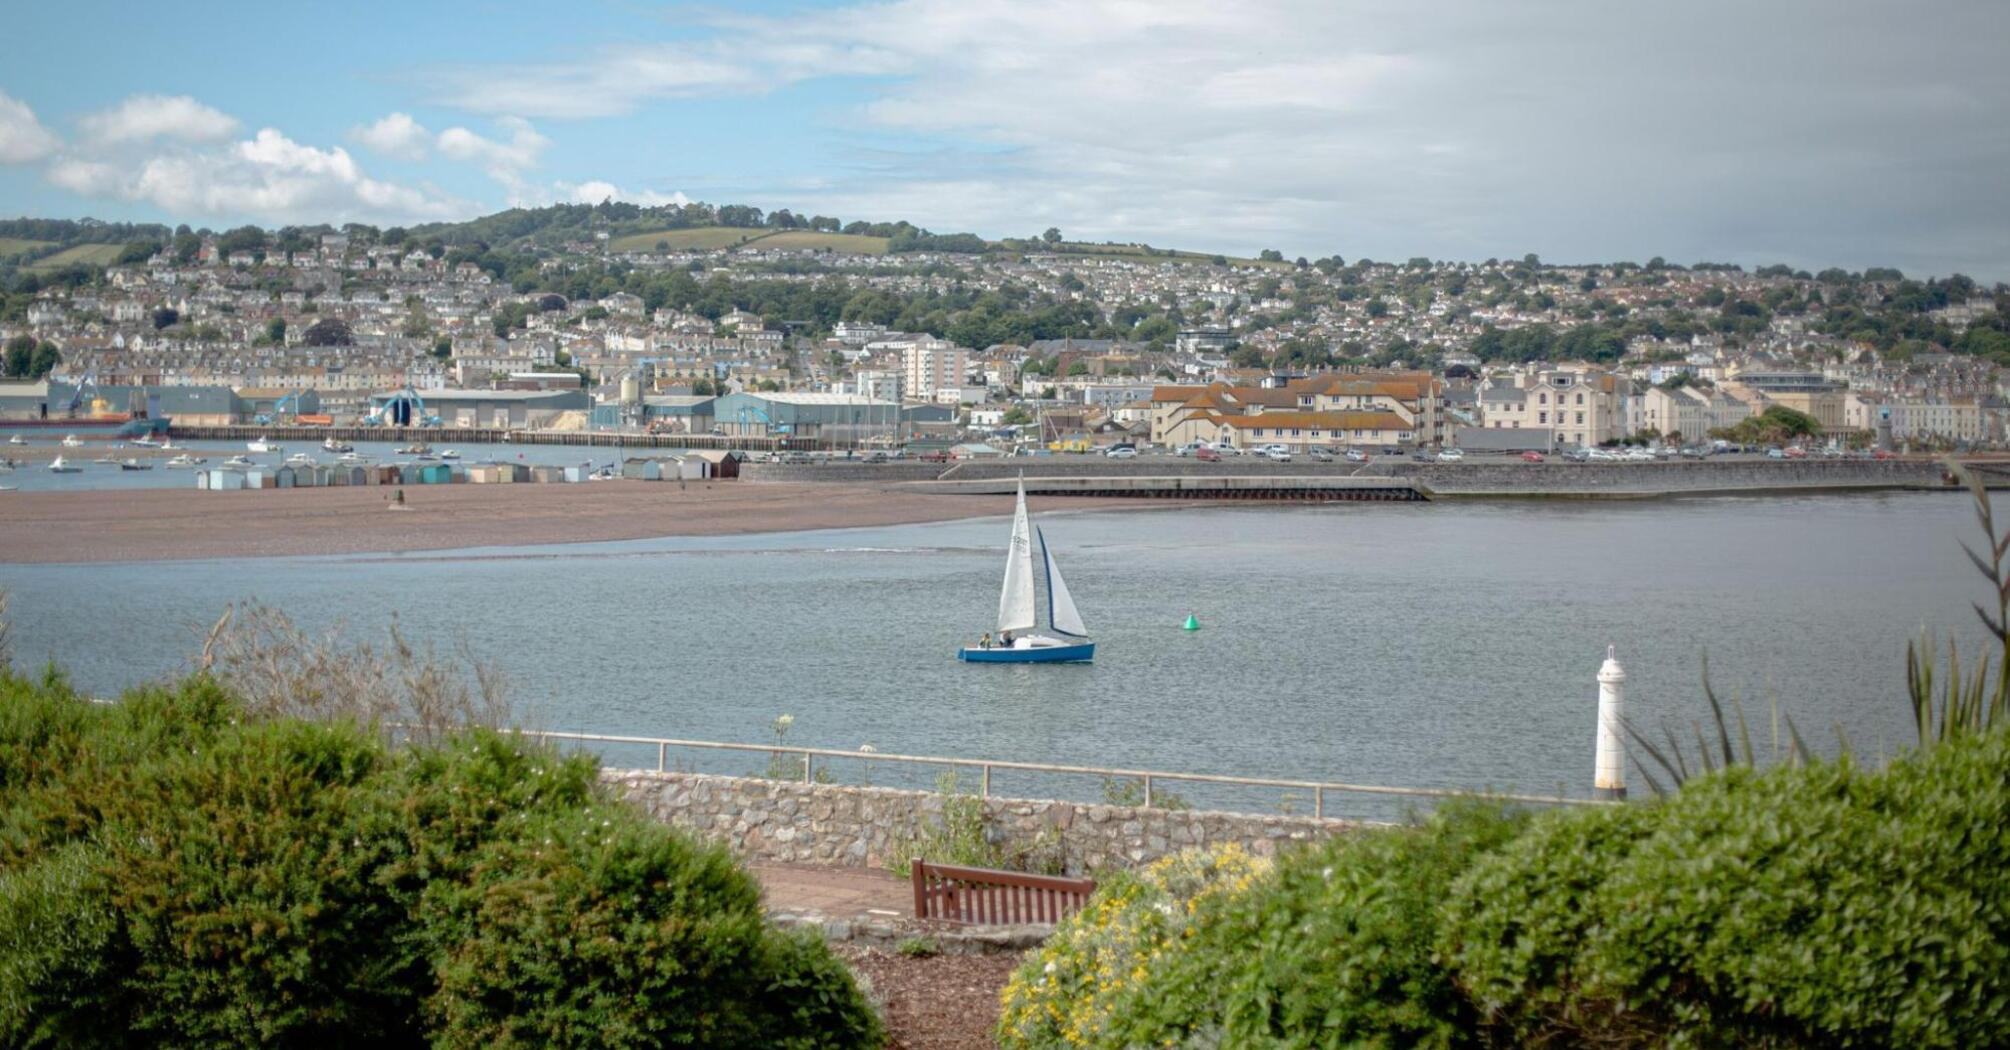 View of a Torbay city with sailboats in the water and houses on the hills